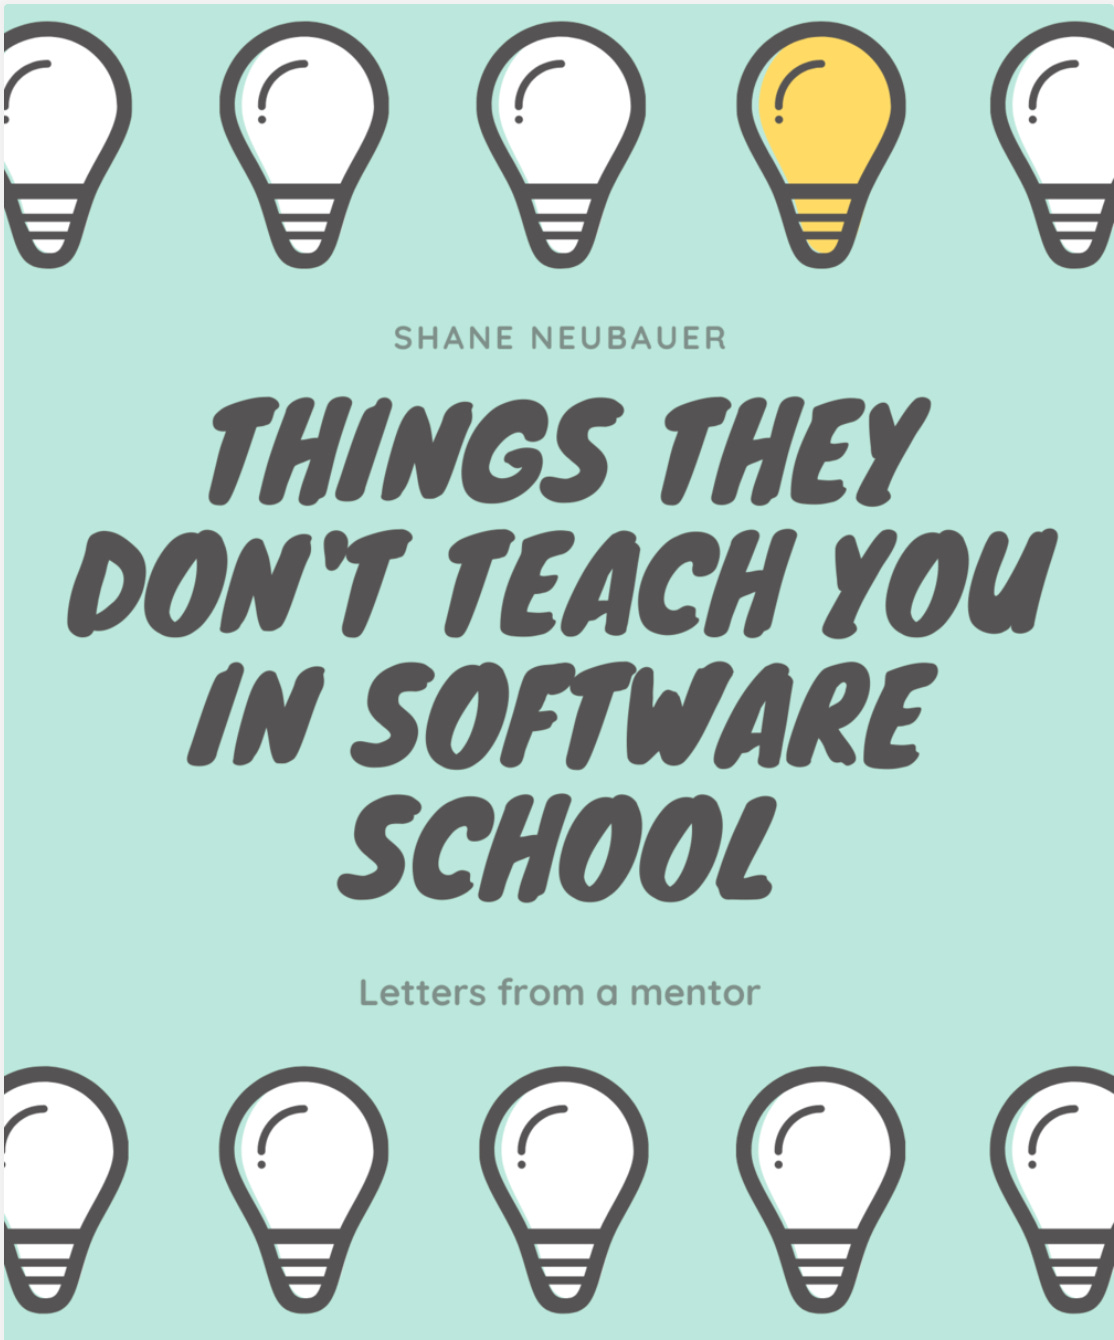 Things they don't teach you in software school